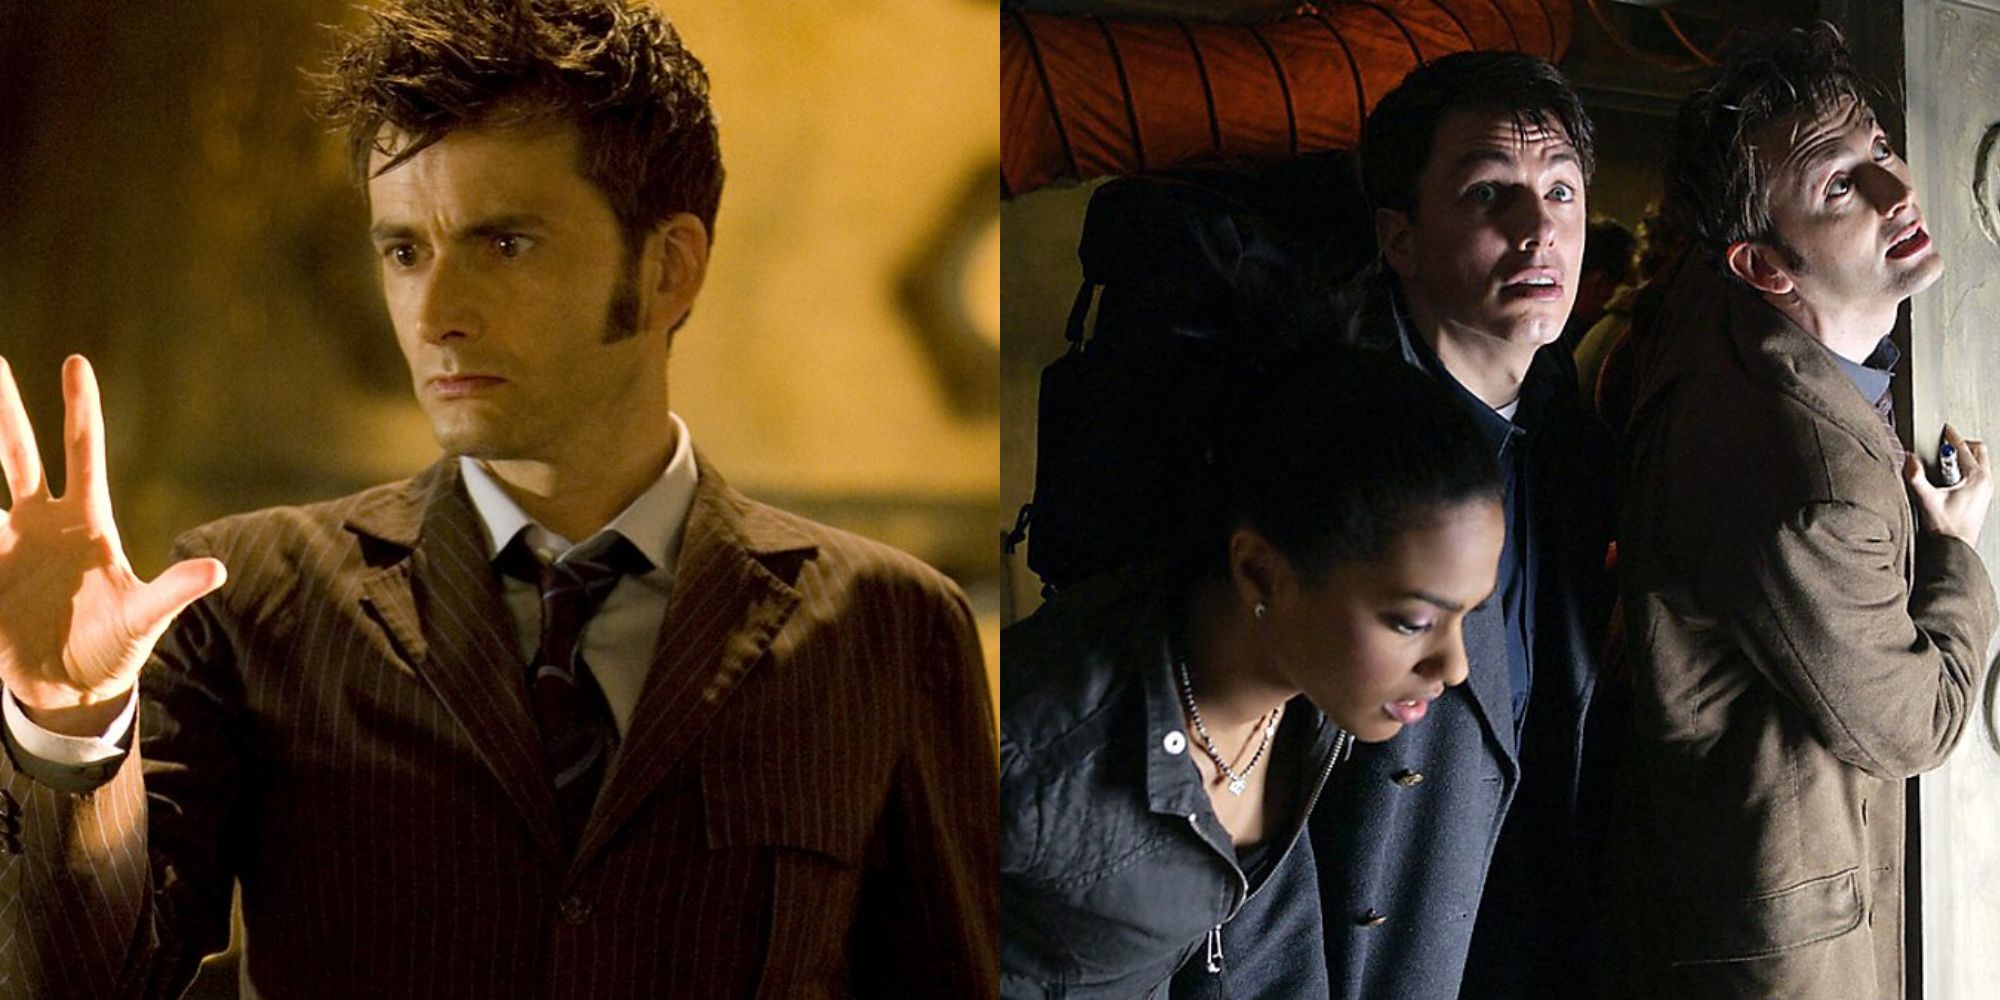 Split image showing The Tenth Doctor alone and with companions in Doctor Who.